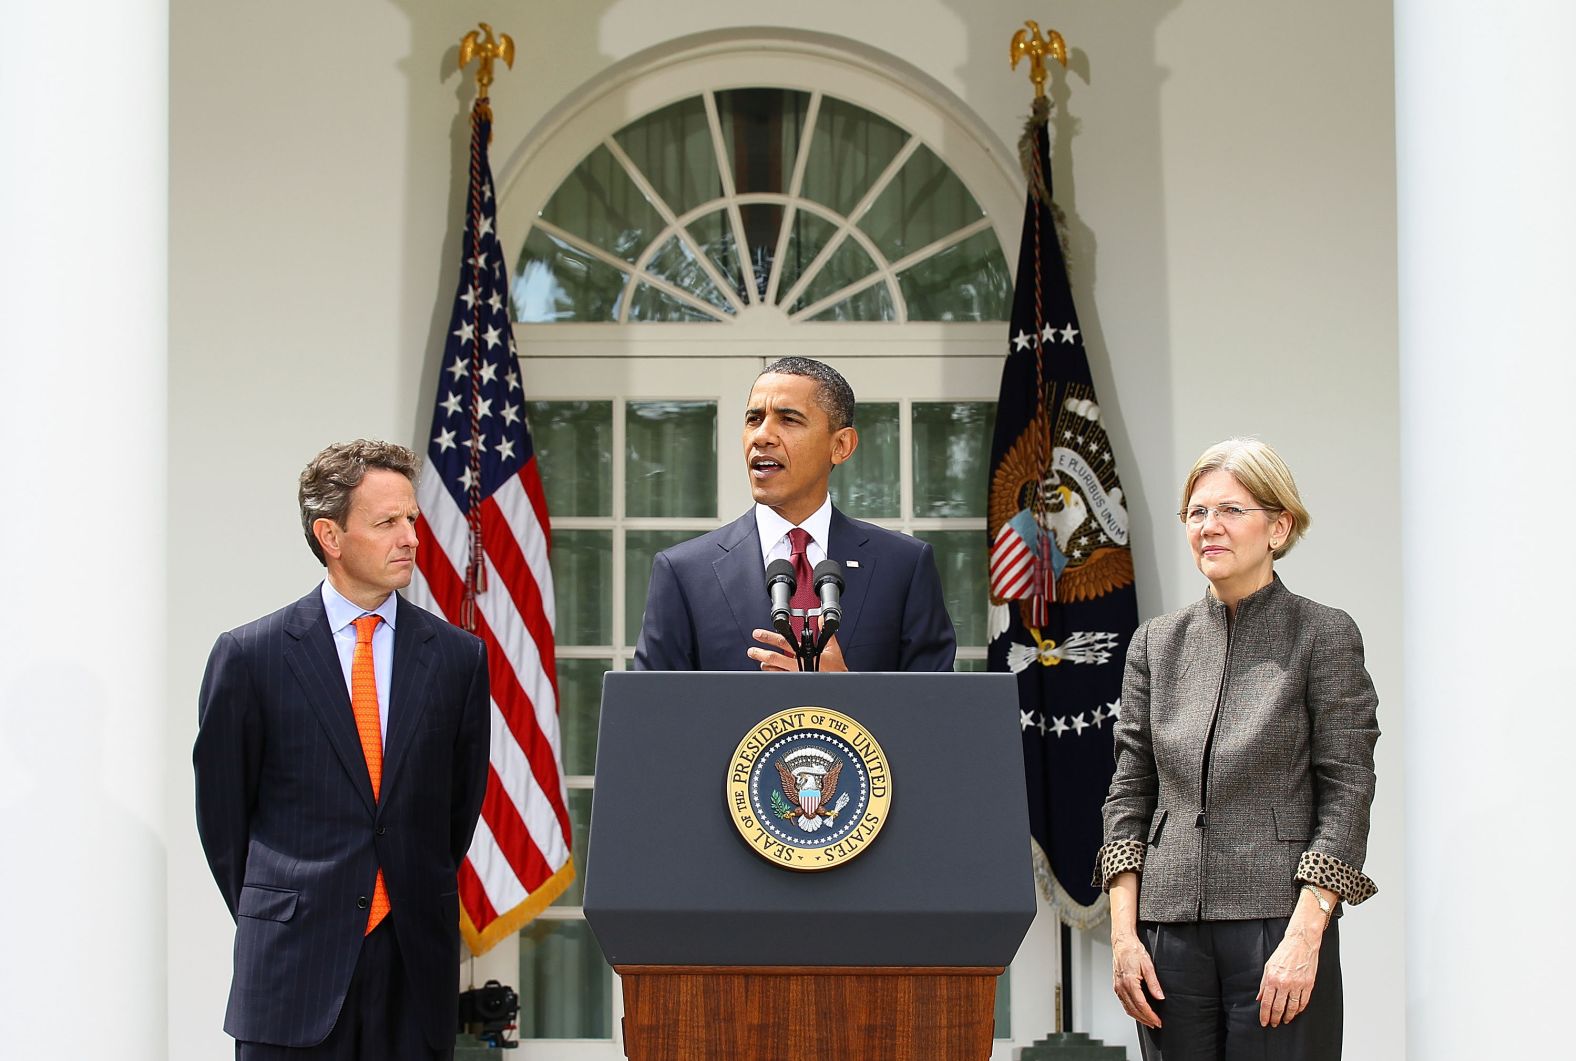 Warren and Treasury Secretary Timothy Geithner listen to President Barack Obama at the White House in September 2010. Obama was appointing Warren to be his assistant and special adviser to the Treasury Secretary in order to launch the Consumer Financial Protection Bureau. Warren had long called for a federal agency designed to protect consumers from fraudulent or misleading financial products.